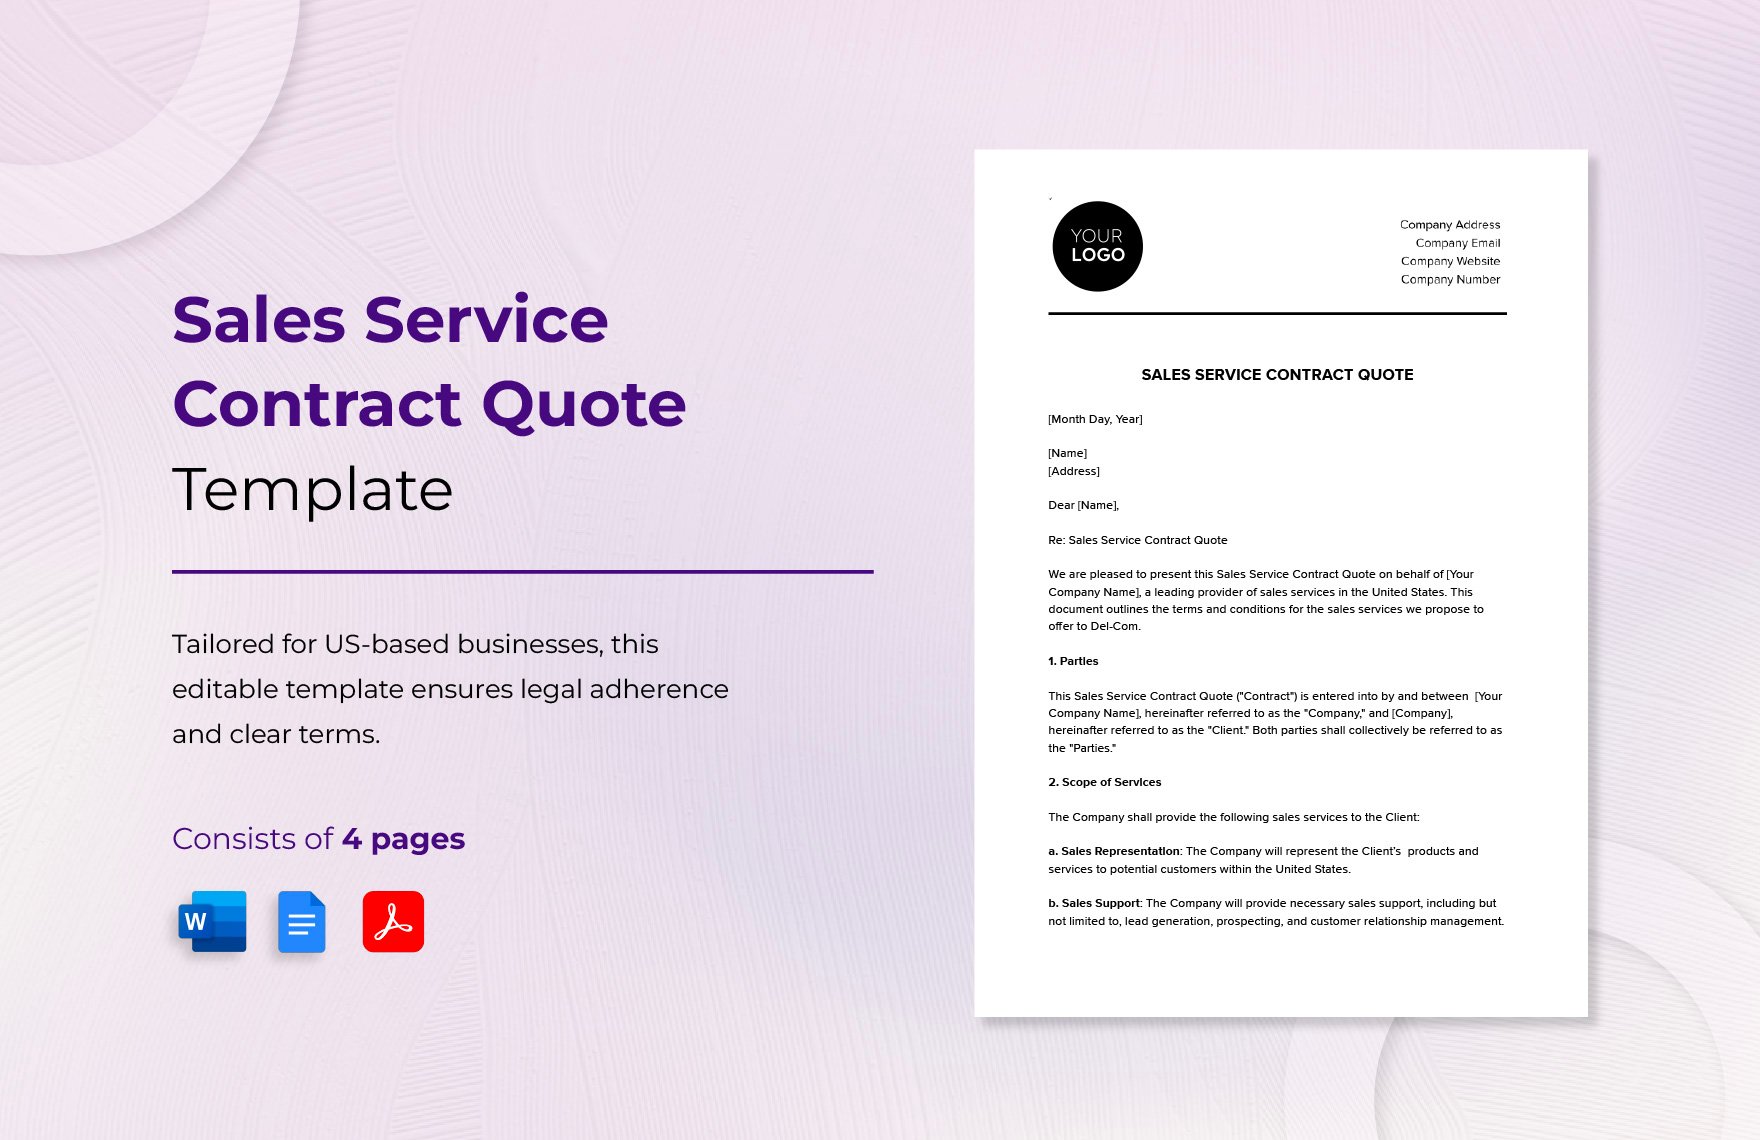 Sales Service Contract Quote Template